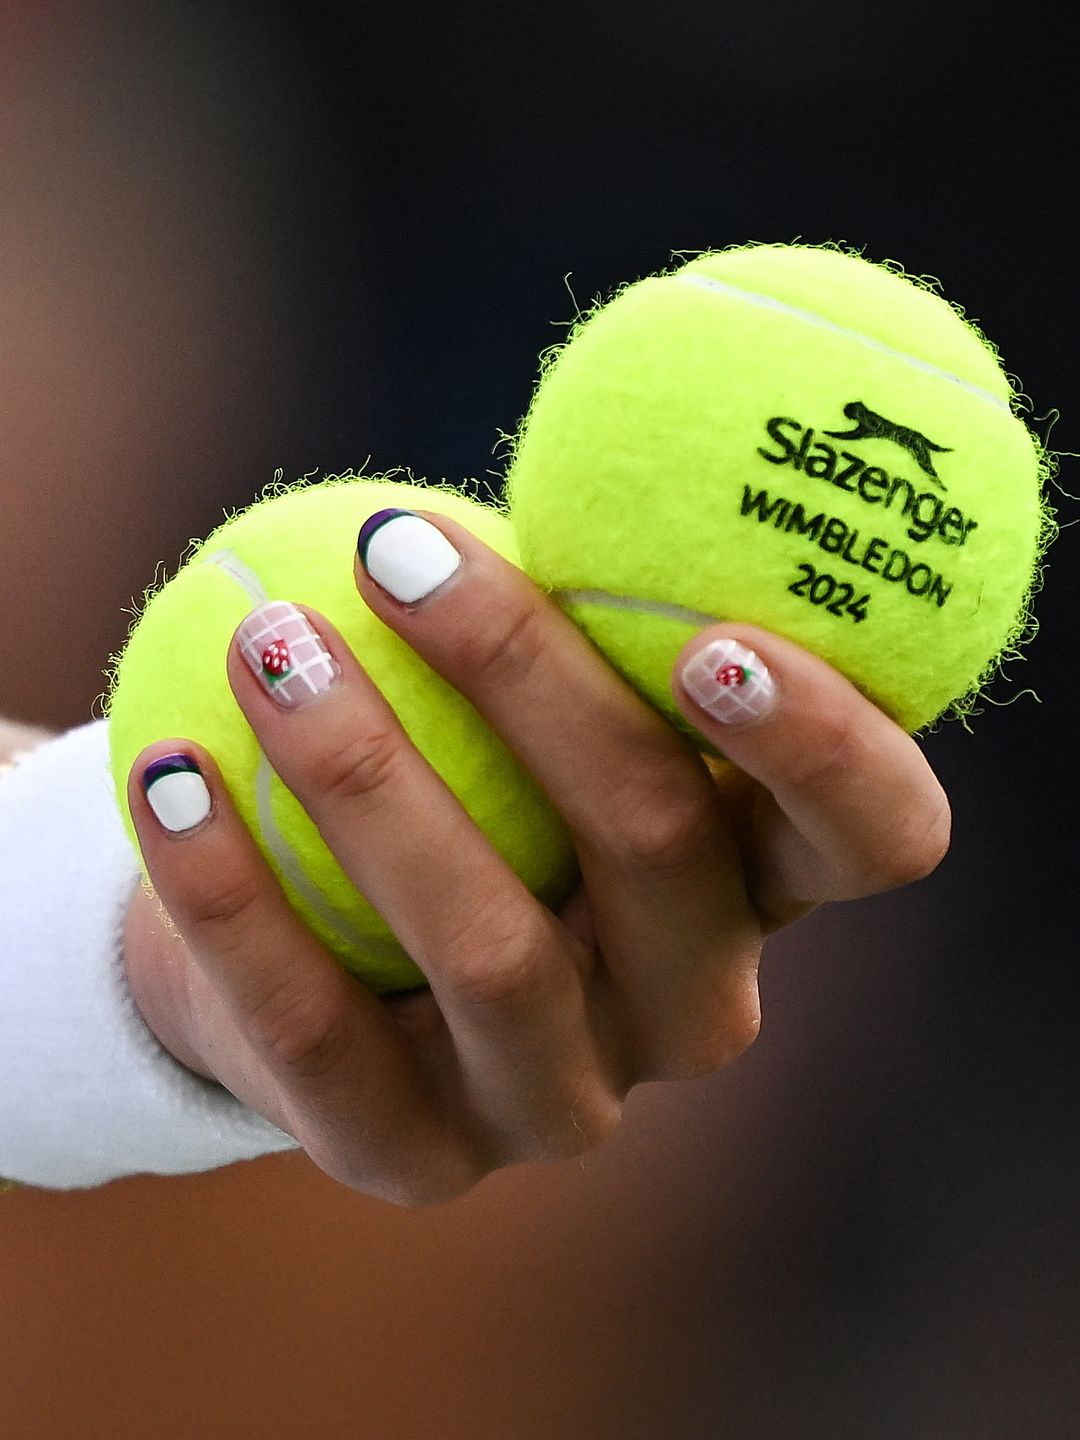 Katie Boulter's mani was on full display prior to her serve against Tatjana Maria on day two of Wimbledon 2024 